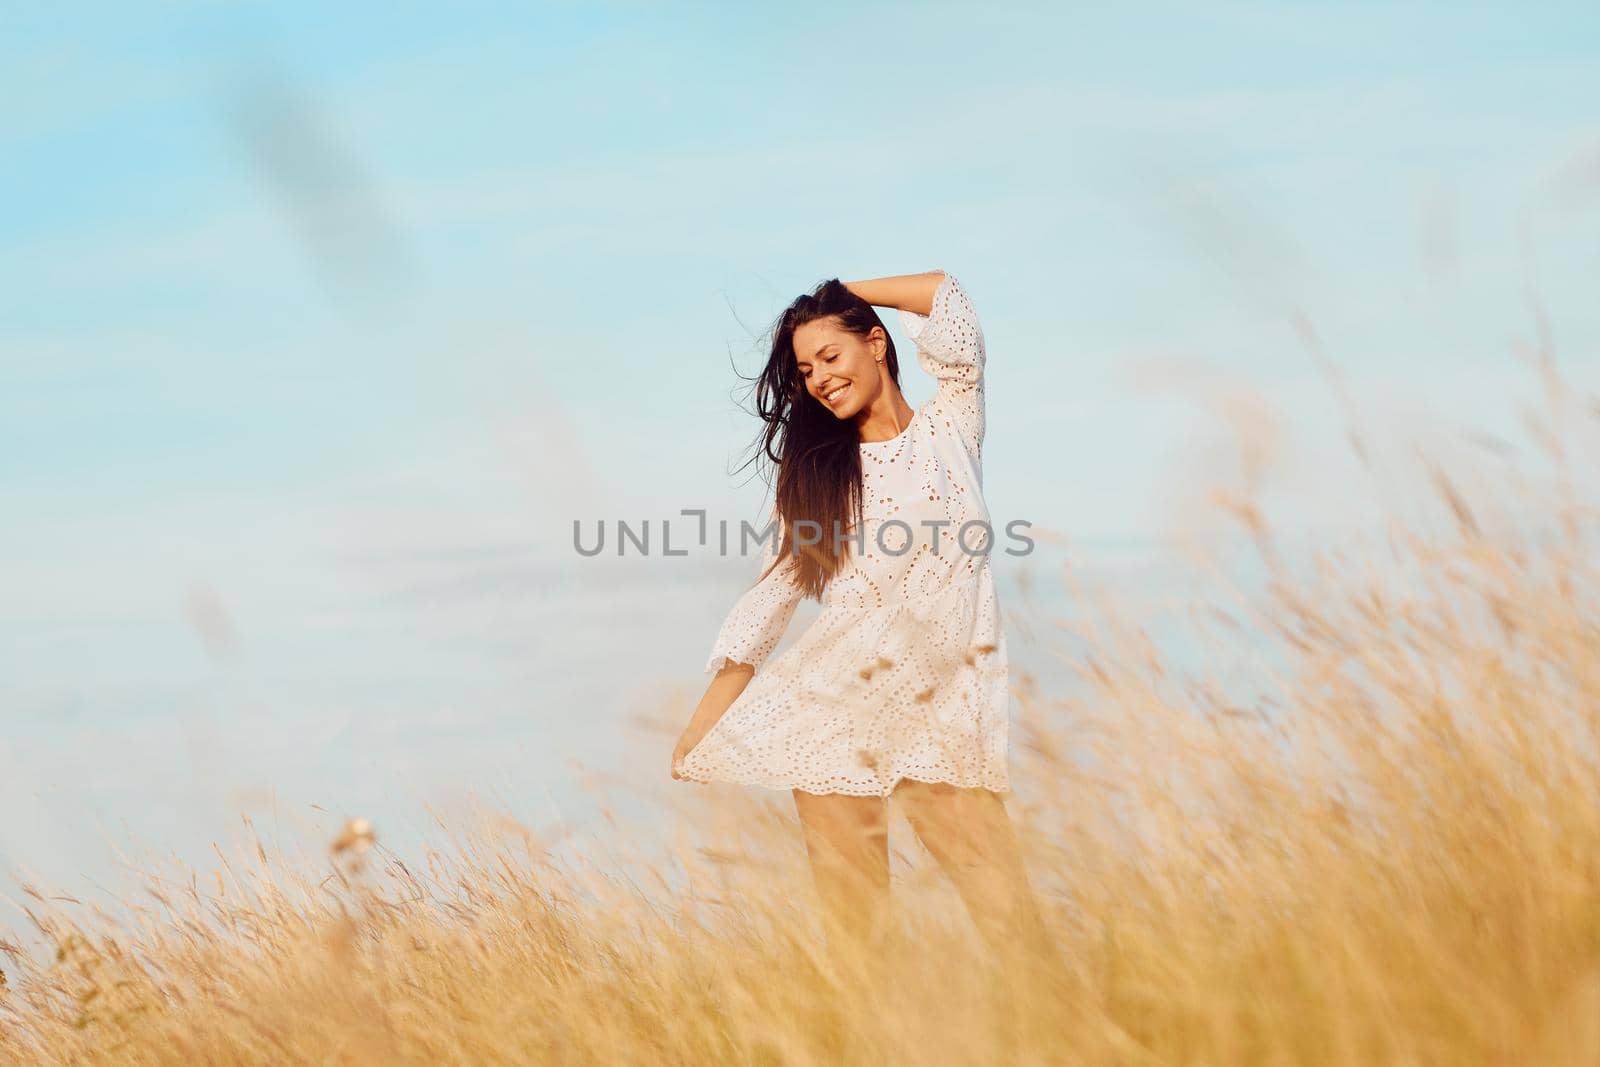 outdoor woman portrait young adult female beautiful girl lifestyle beauty happy attractive summer pretty by Picsfive